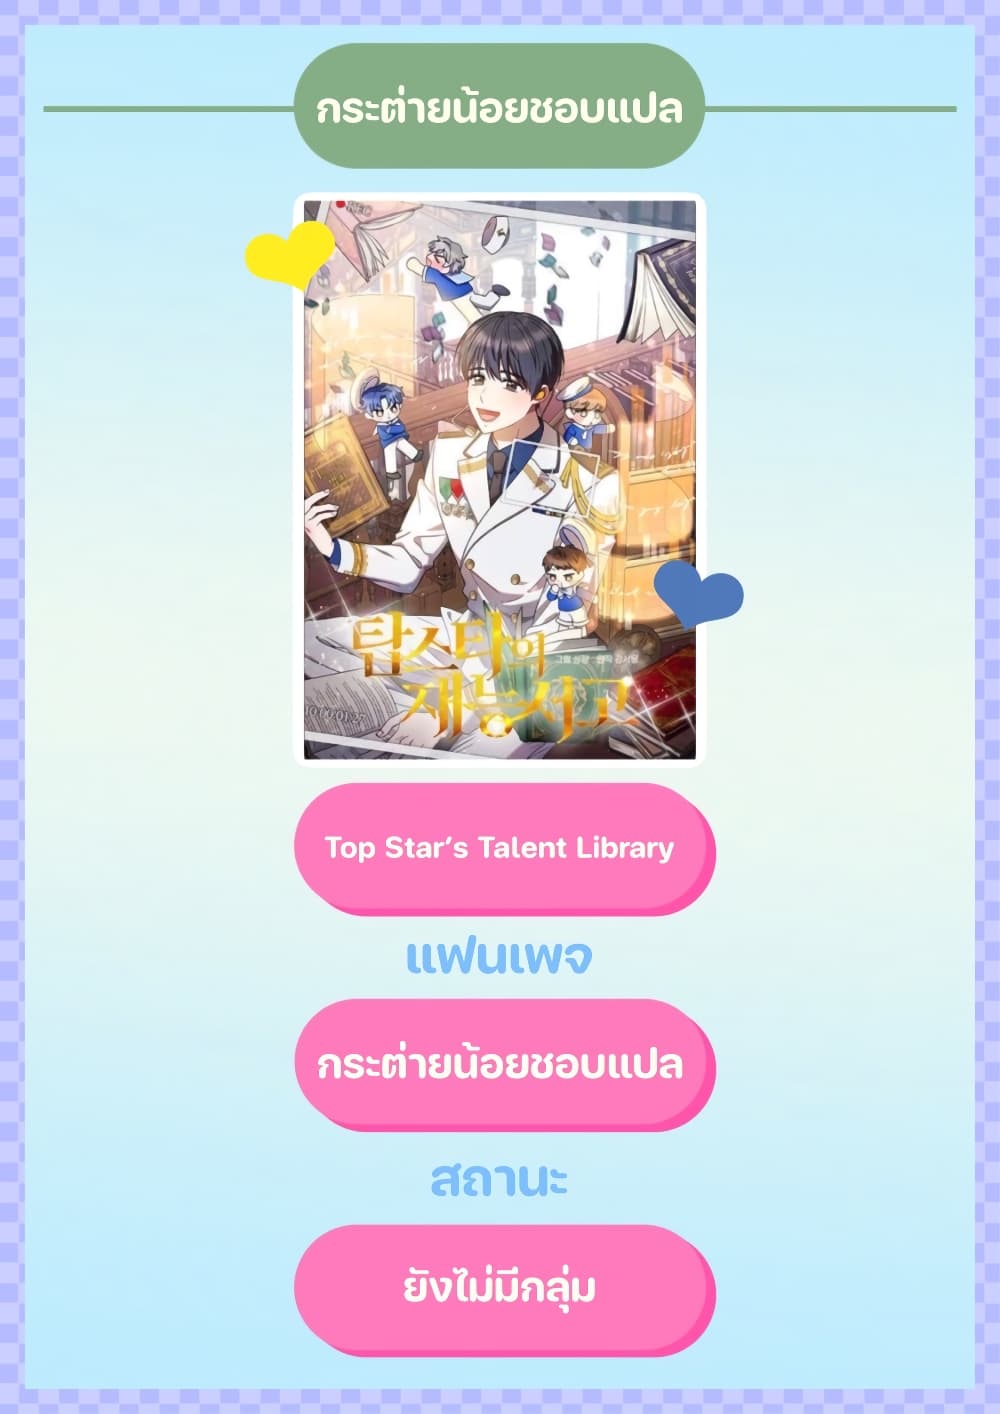 Top Star's Talent Library 2-2